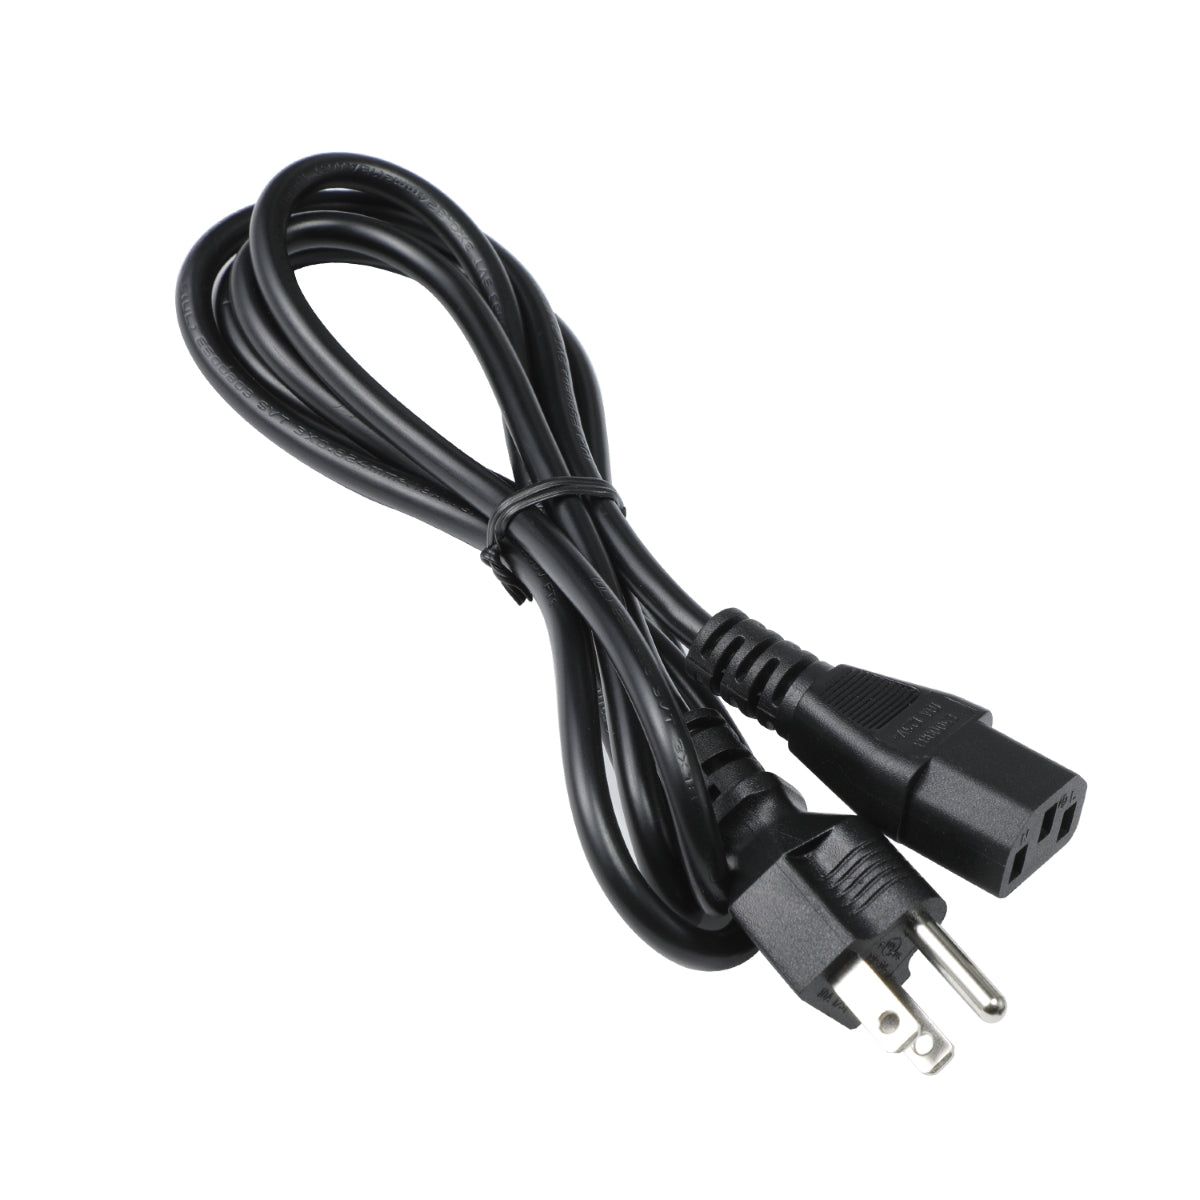 Power Cord for Acer CP1271 Vbmiiprzx Monitor